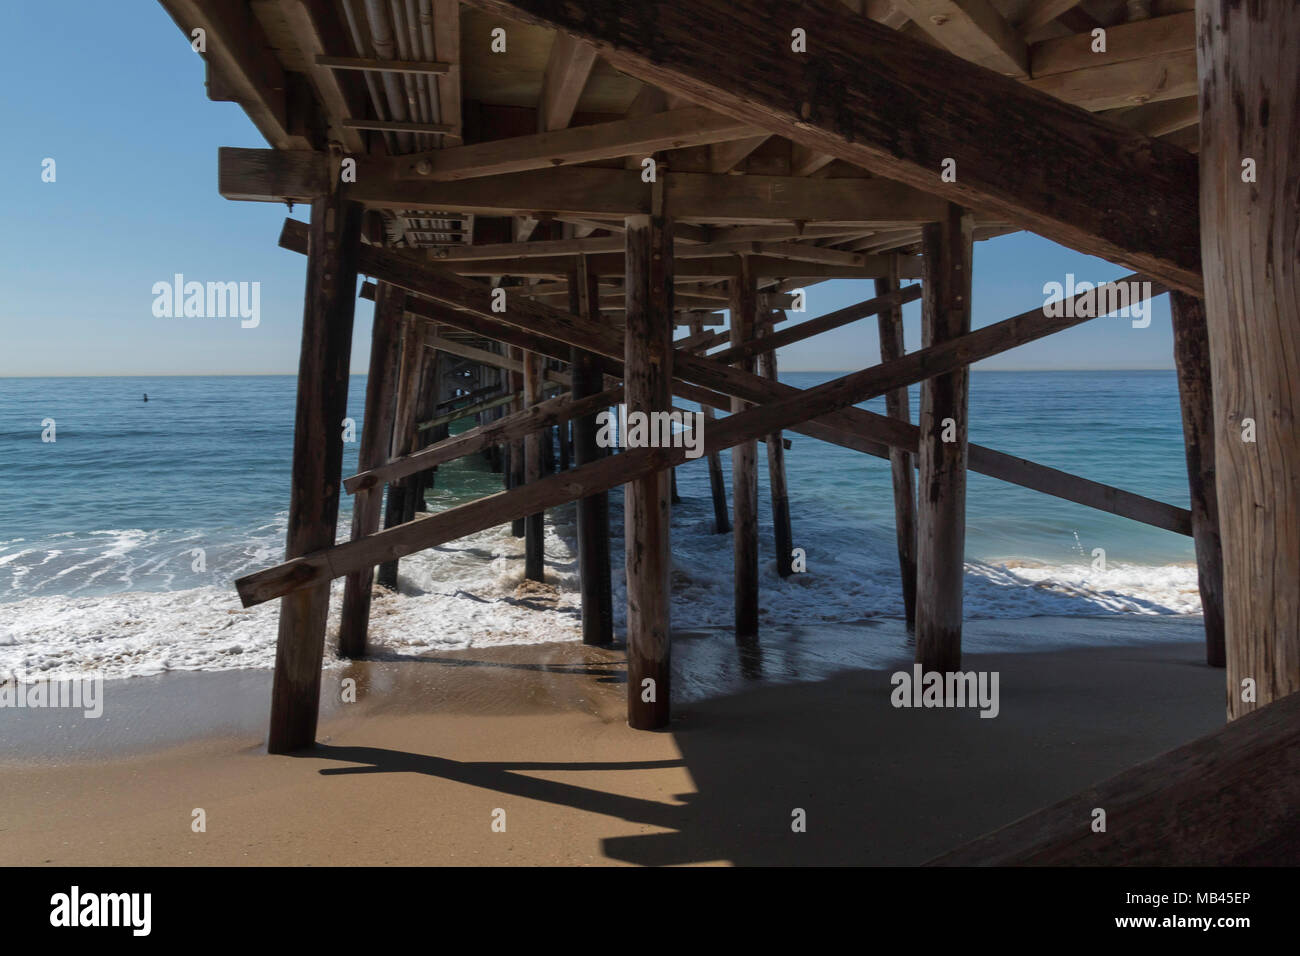 Under the Wooden Pier, wooden structure details, blue ocean waters, Pacific, sand, sunny, misty, daylight, summer, holidays, Newport Beach, California Stock Photo